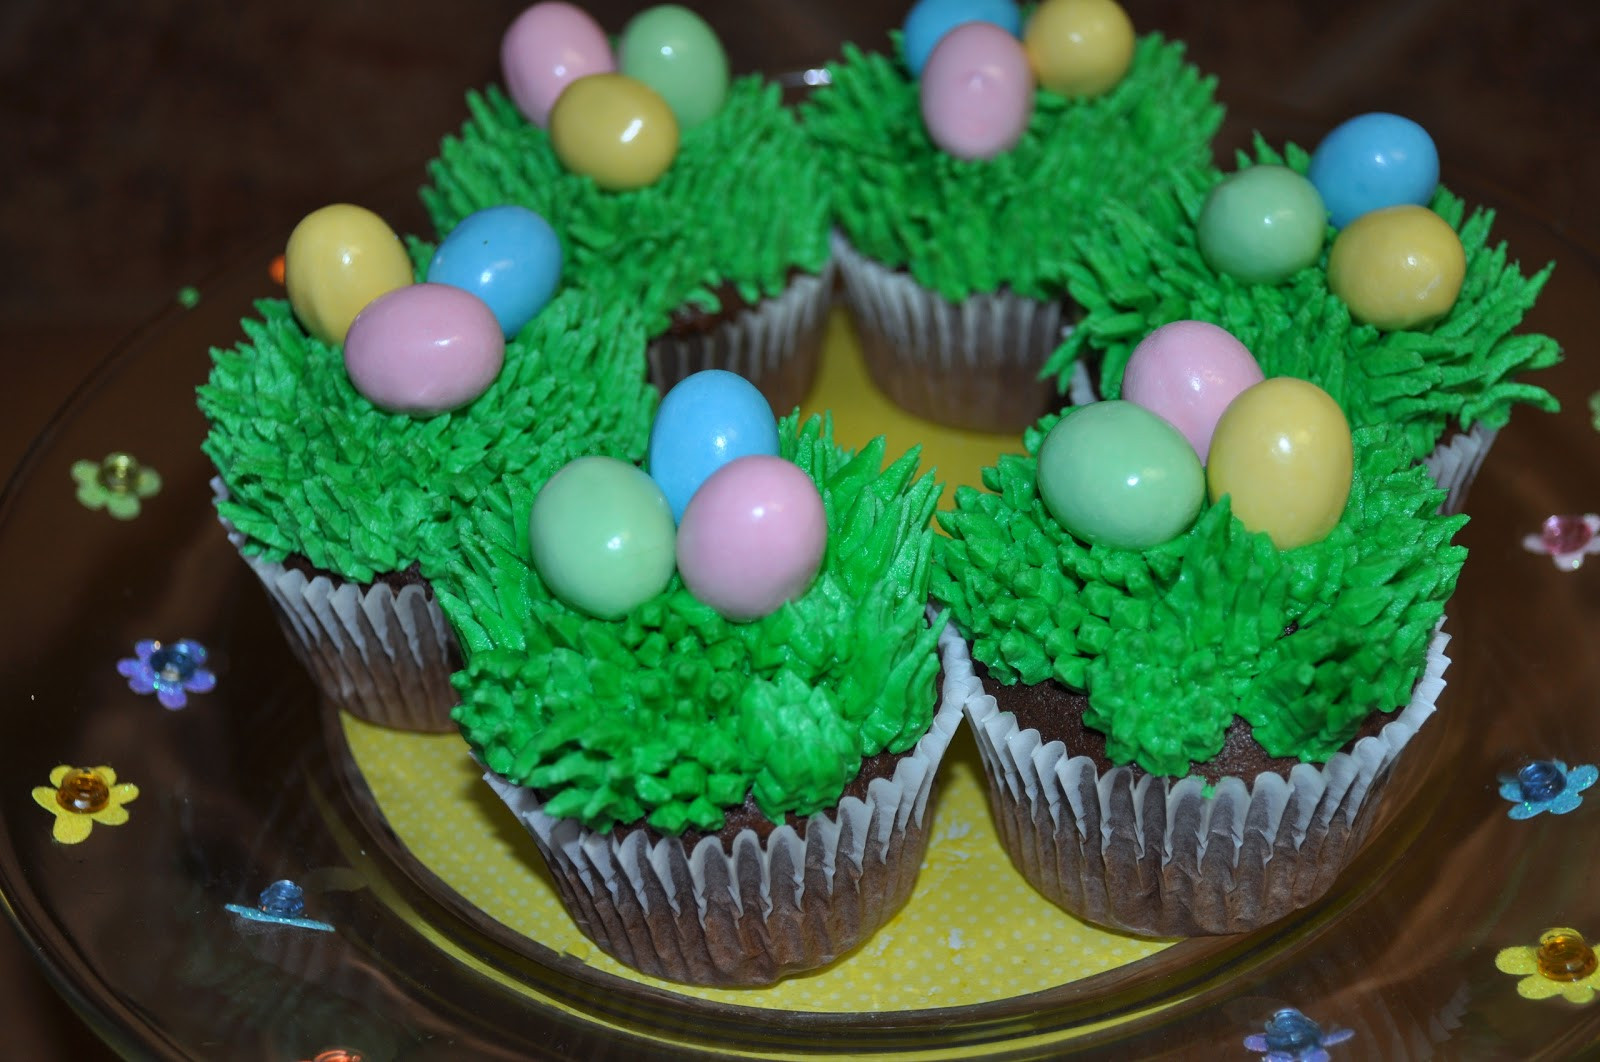 Easter Cupcakes Images
 Morgan s Cakes Easter Cupcakes